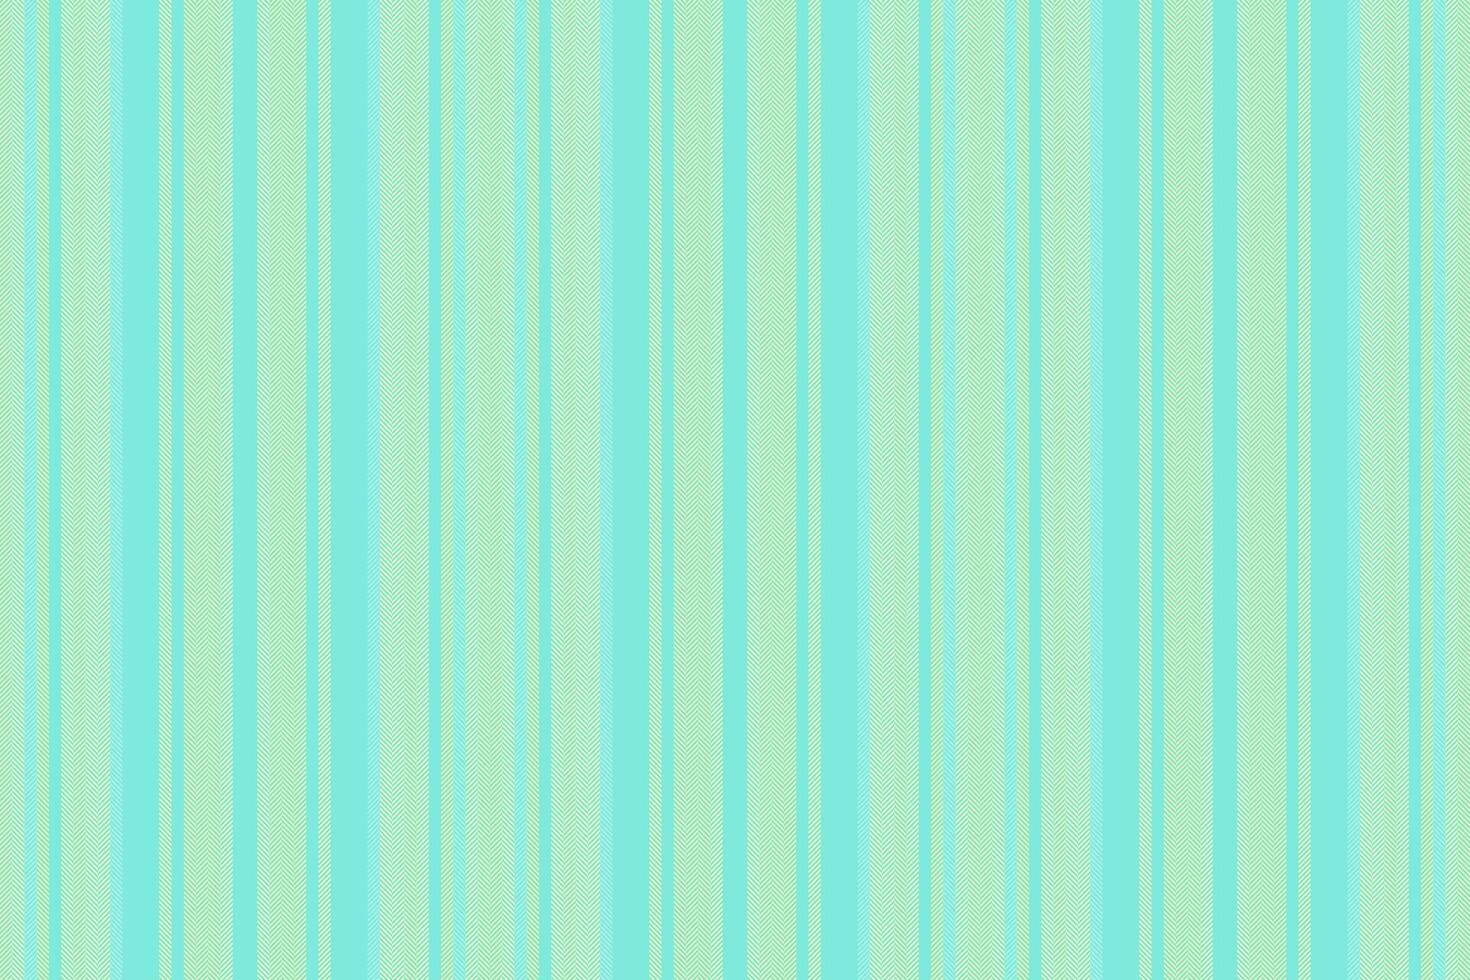 Lines textile vector of vertical background seamless with a stripe pattern fabric texture.